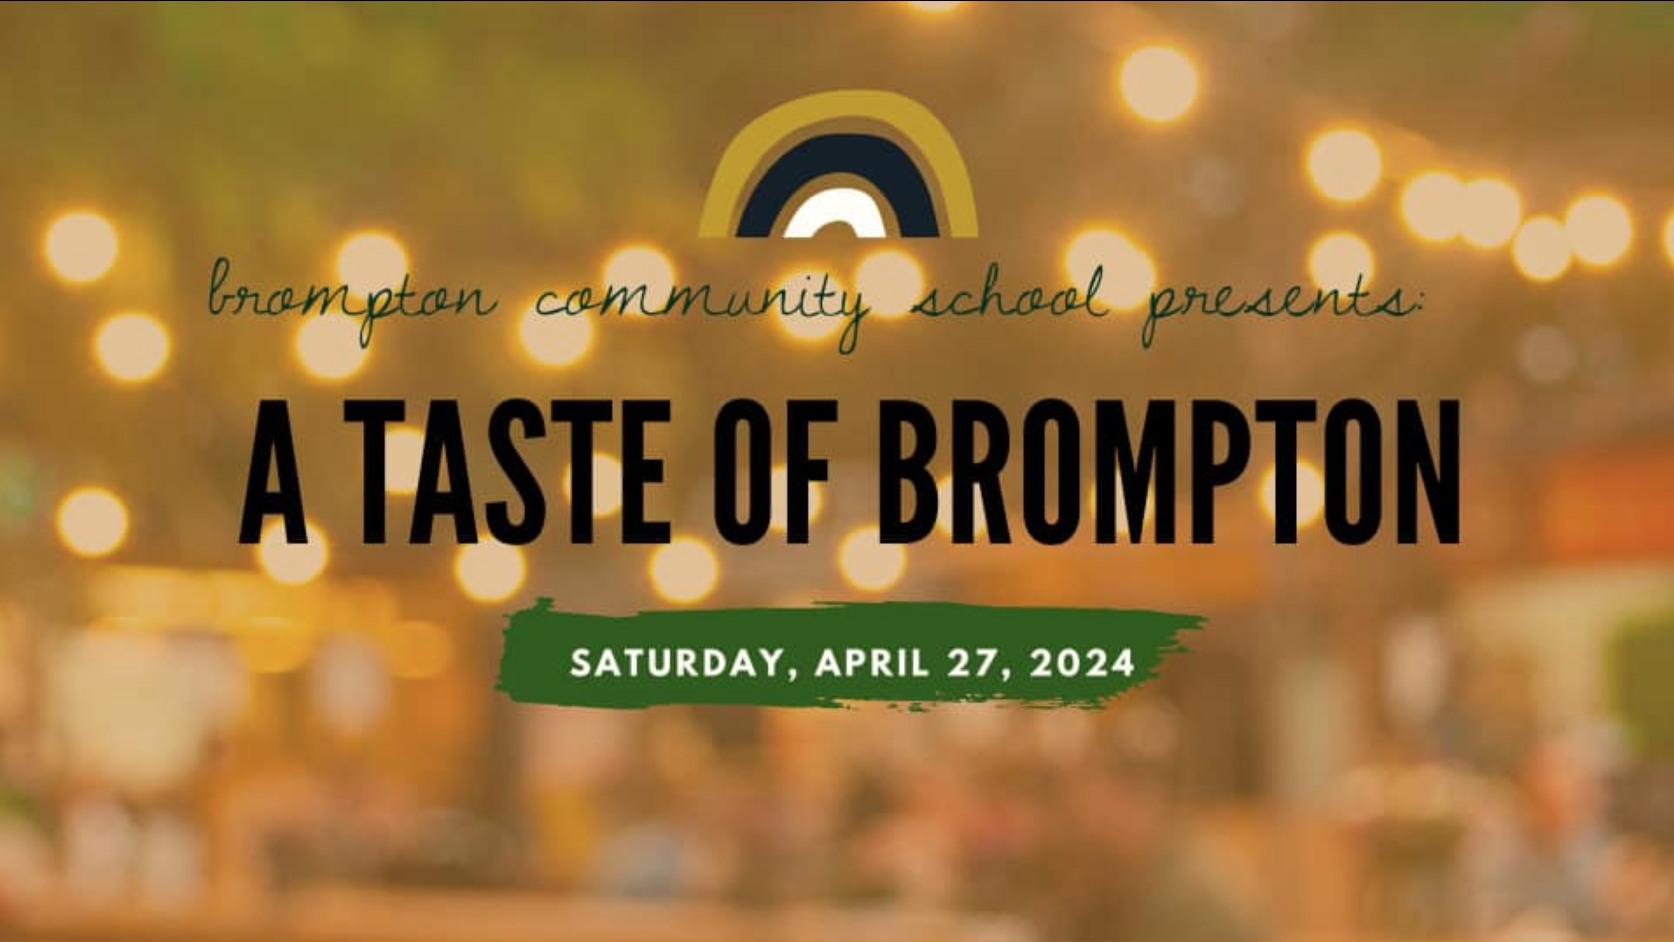 <h1 class="tribe-events-single-event-title">A Taste of Brompton</h1>